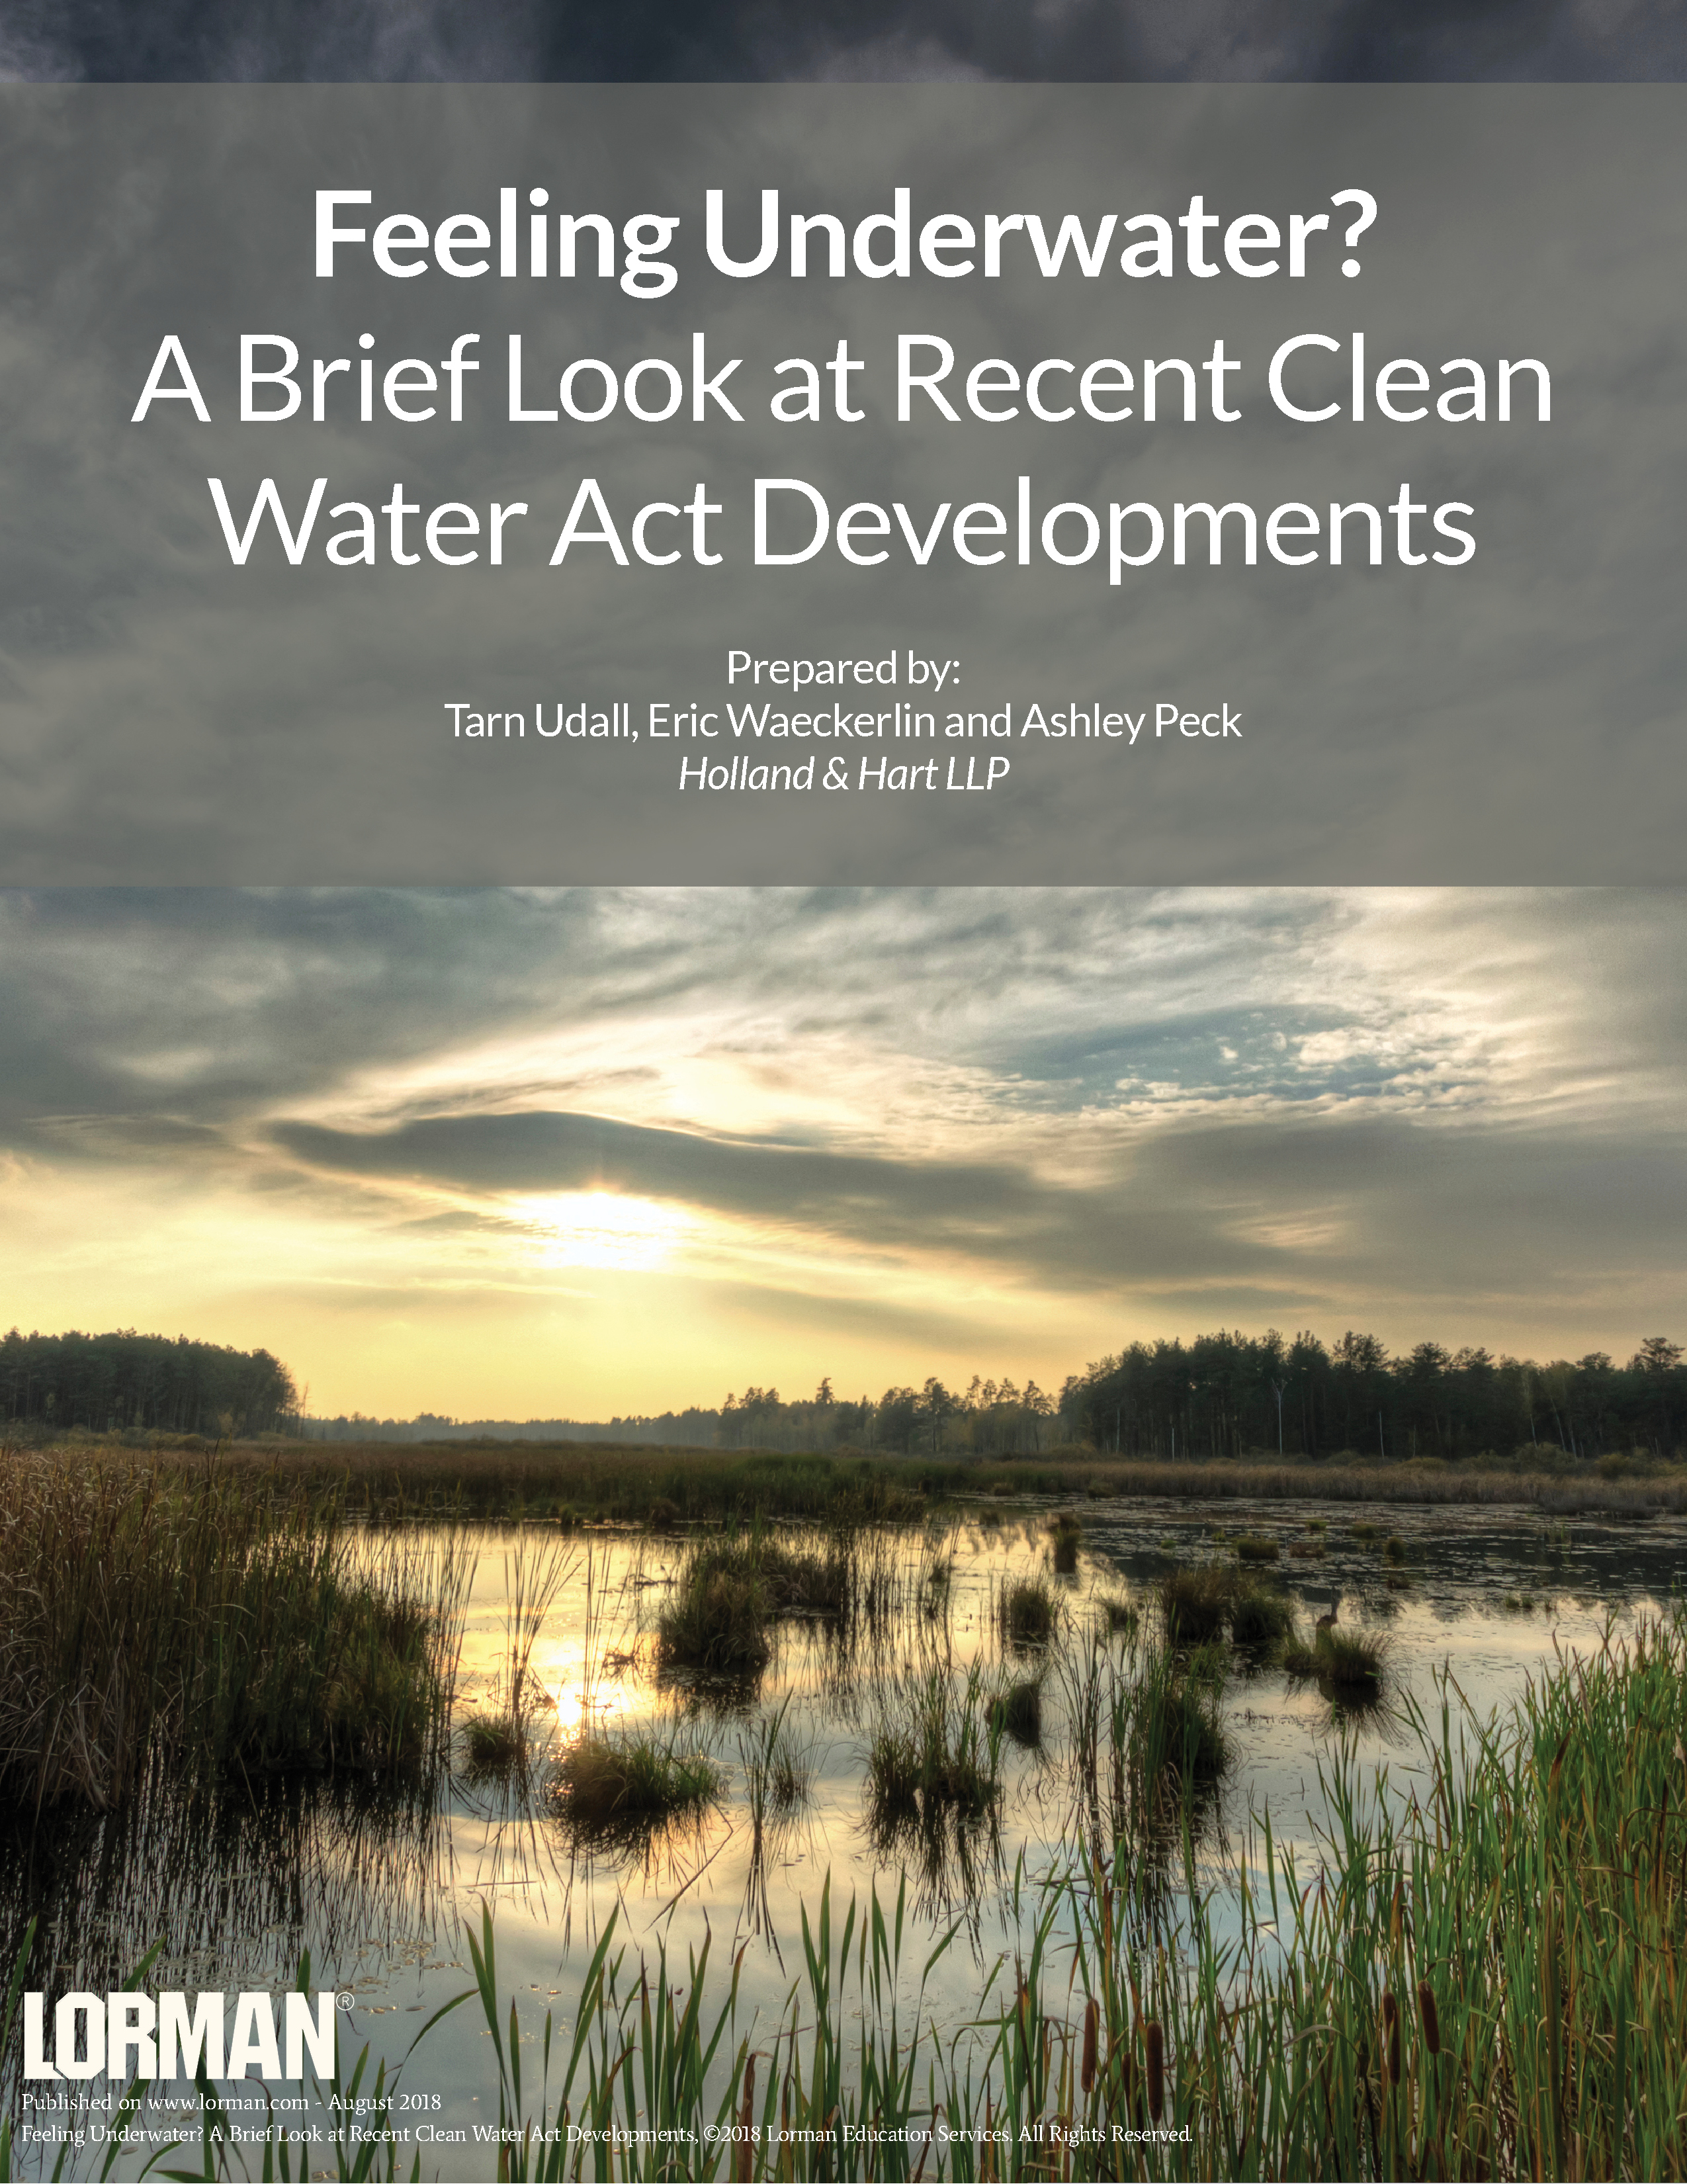 Feeling Underwater - A Brief Look at Recent Clean Water Act Developments